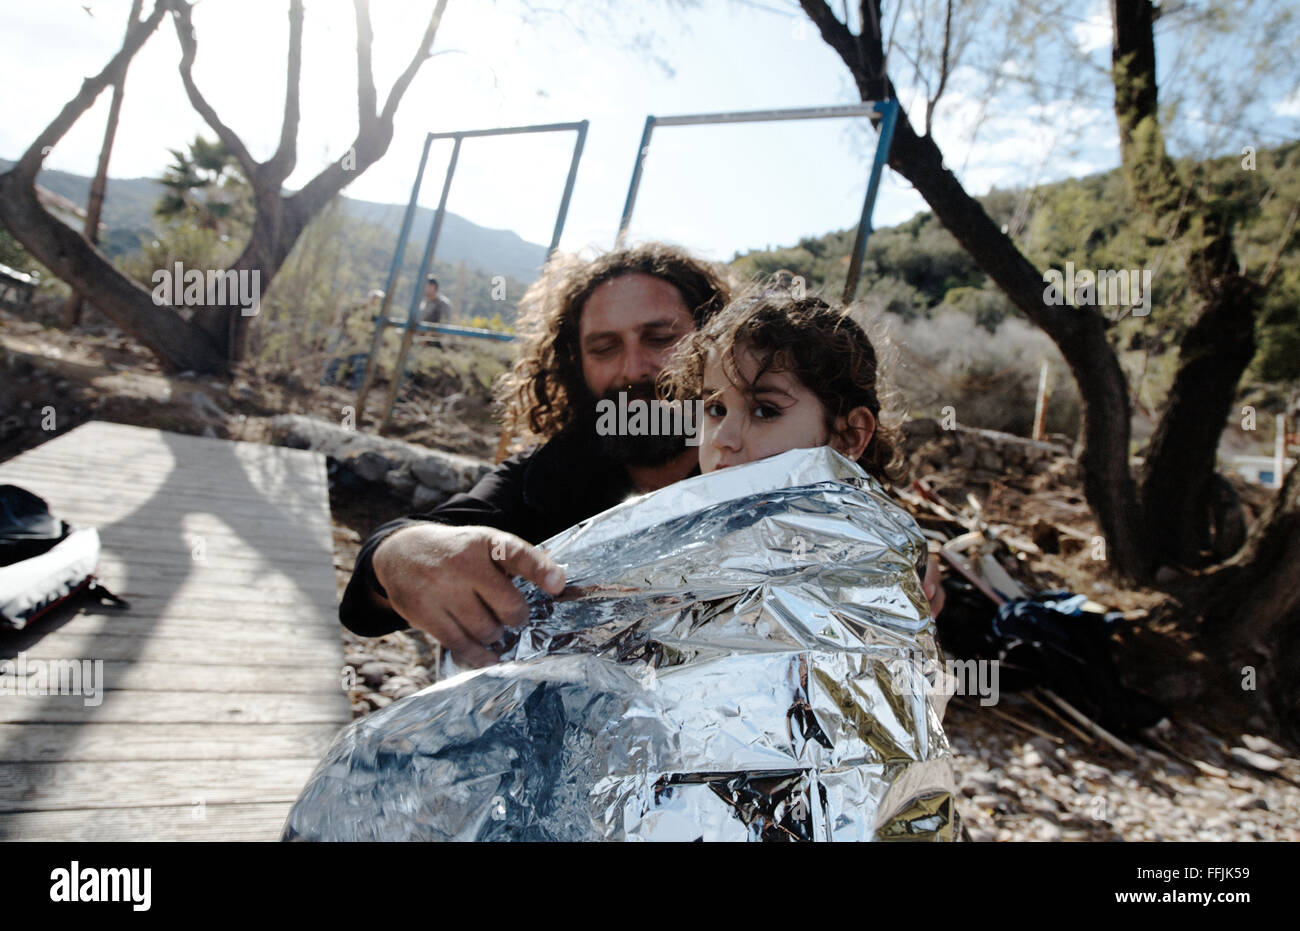 Vasilis, 42 covers a young Syrian girl in an isothermic blanket, after having crossed the 7,5 miles of sea between the Turkish Stock Photo